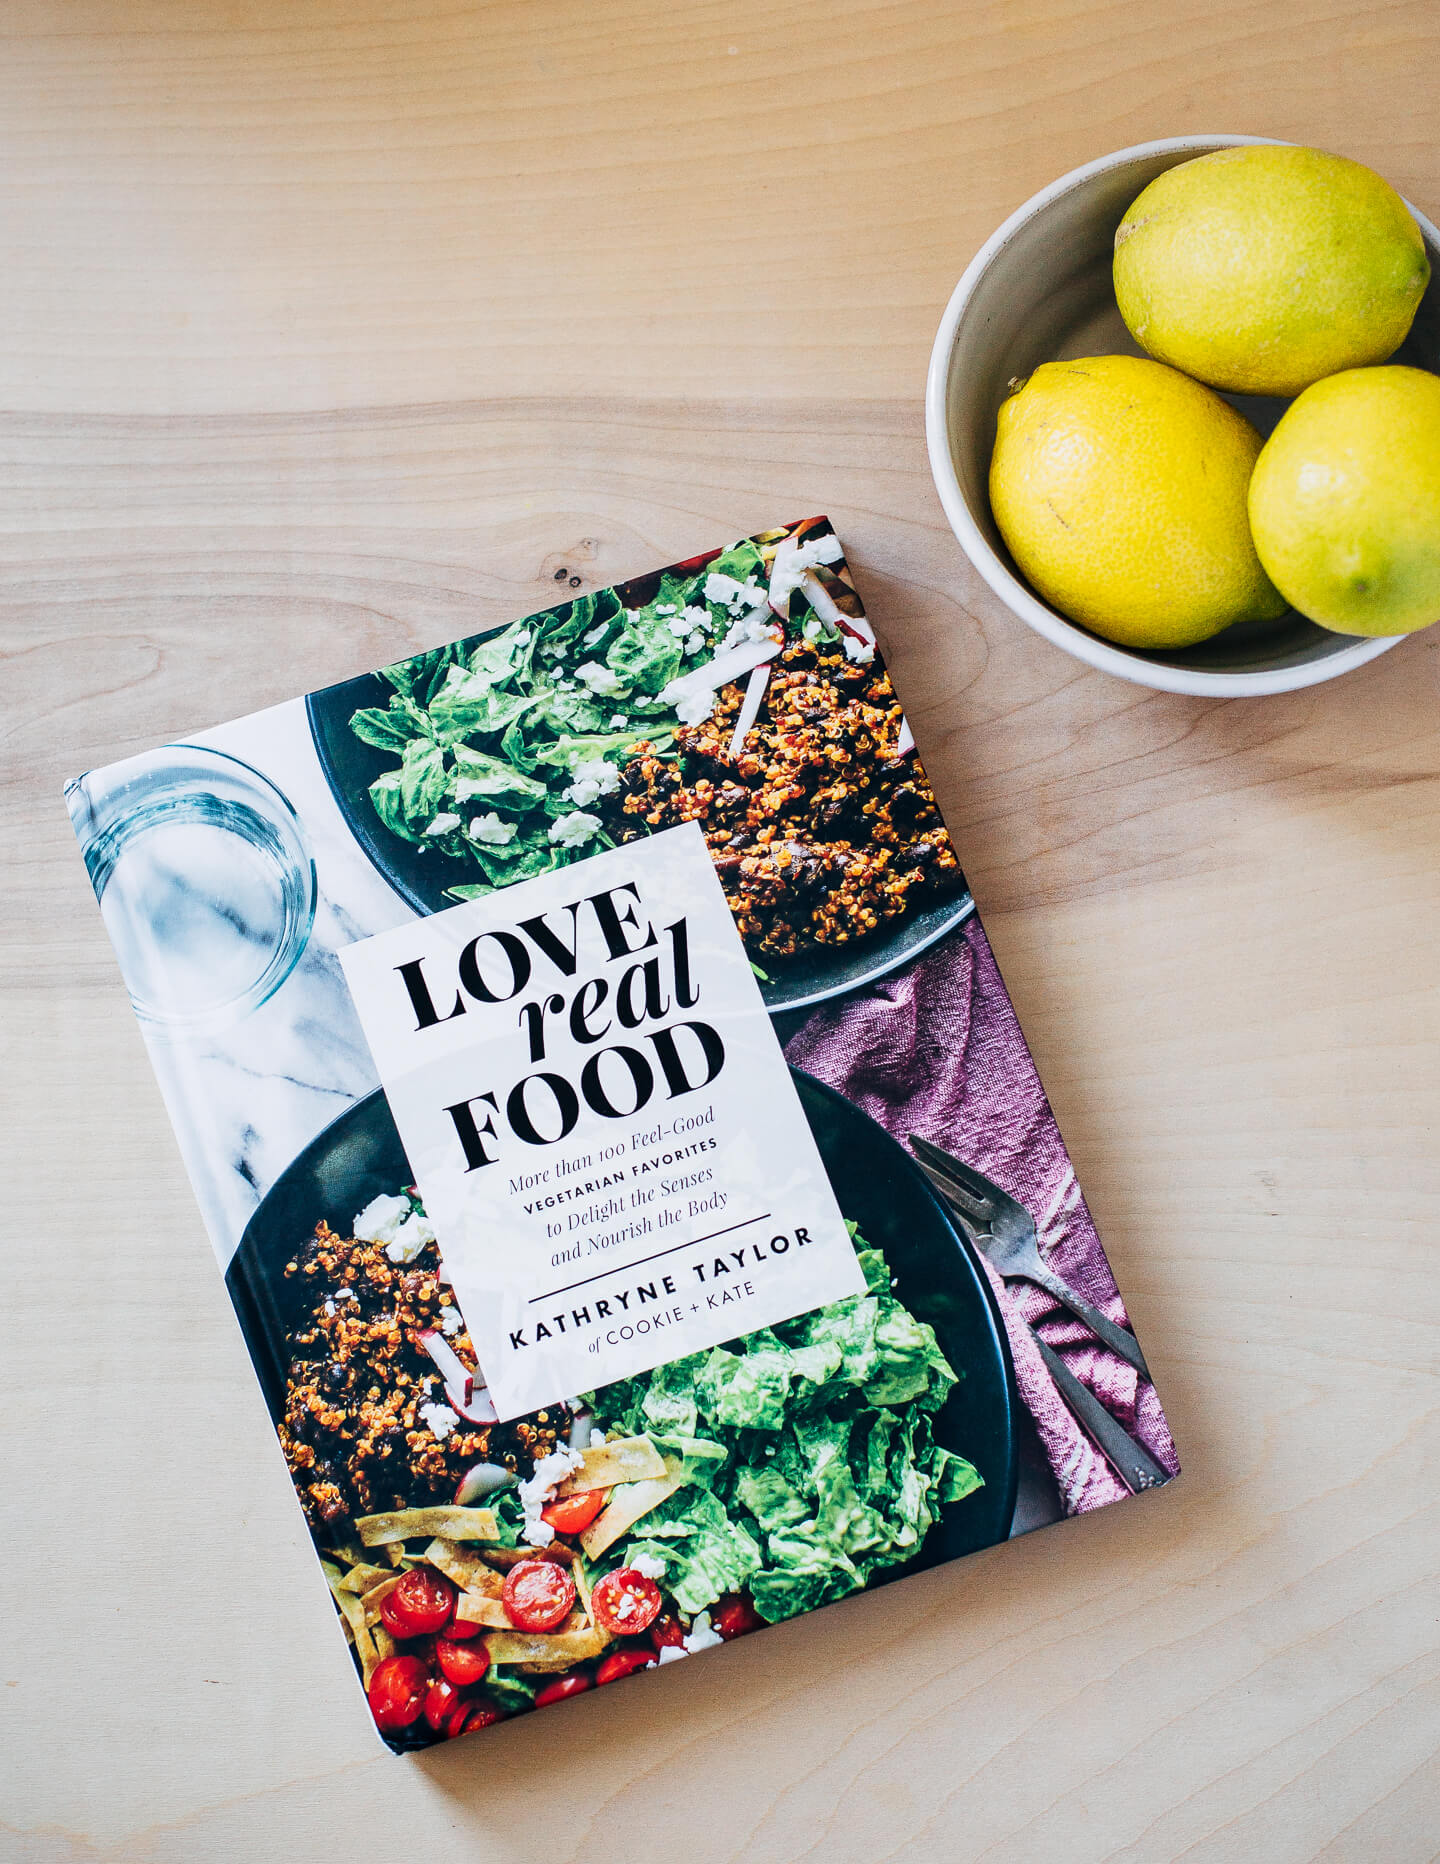 love real food by kathryne taylor //